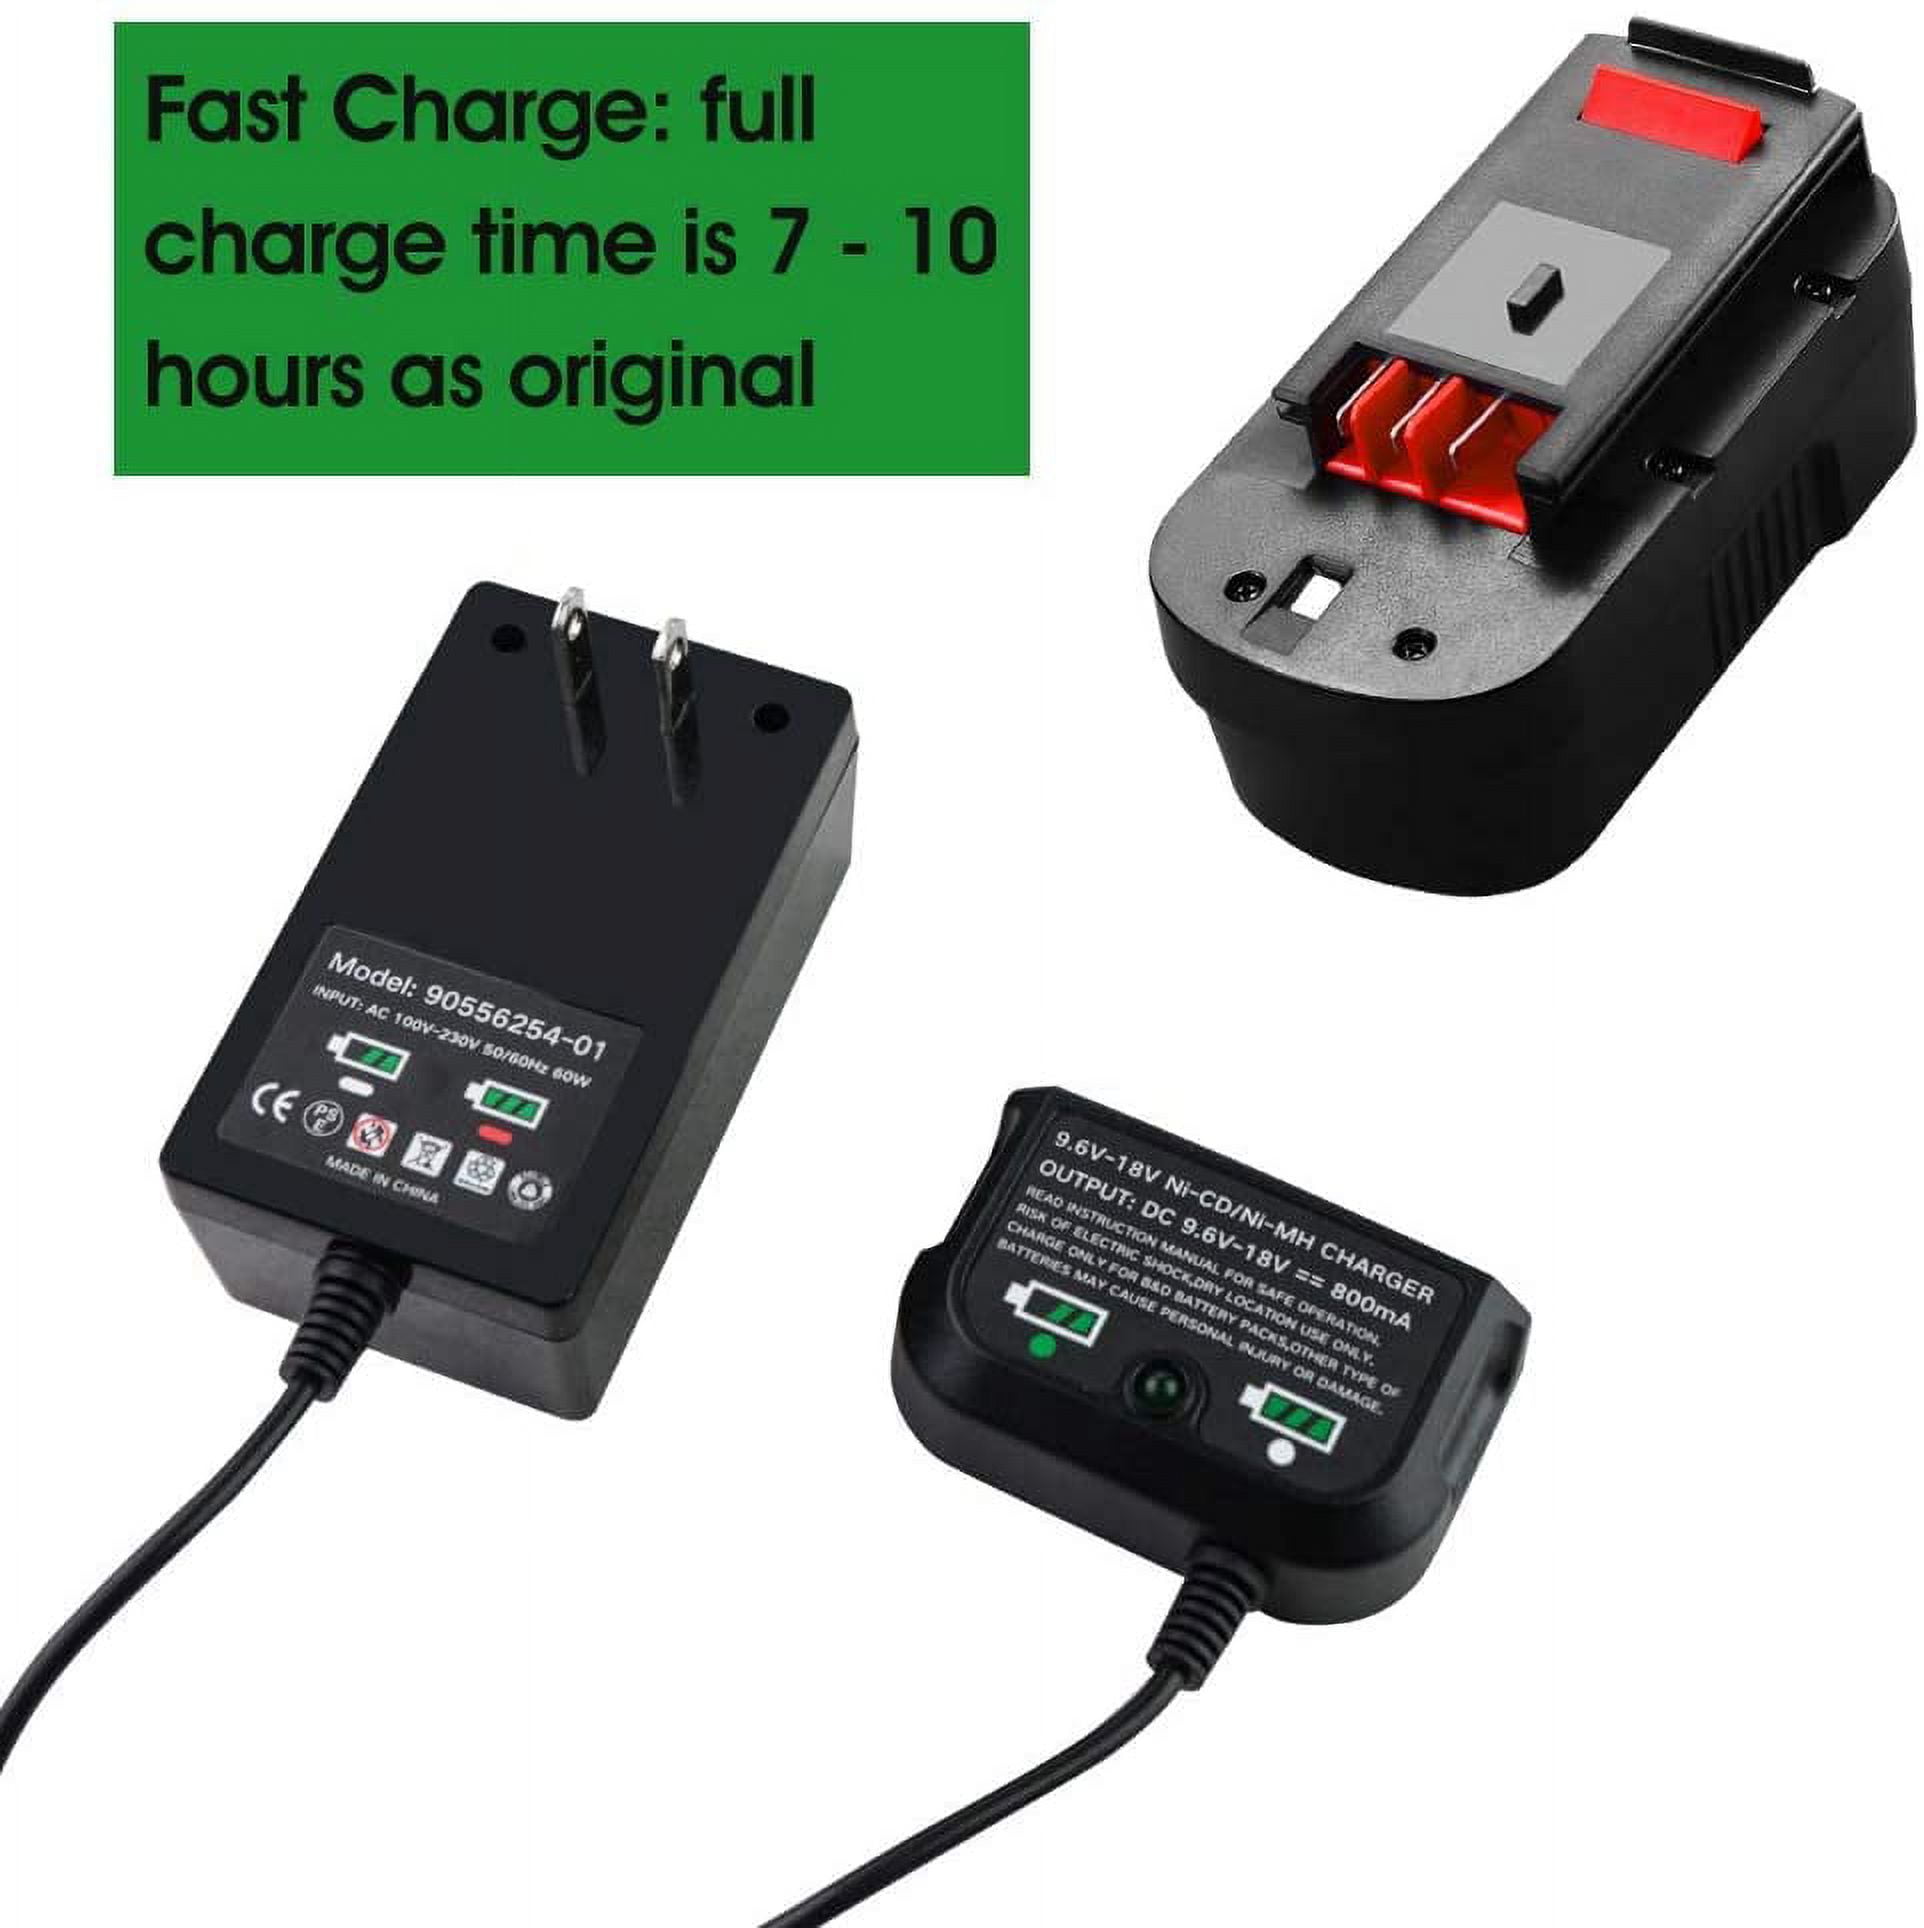 Black and Decker OEM Battery Charger # 90553168